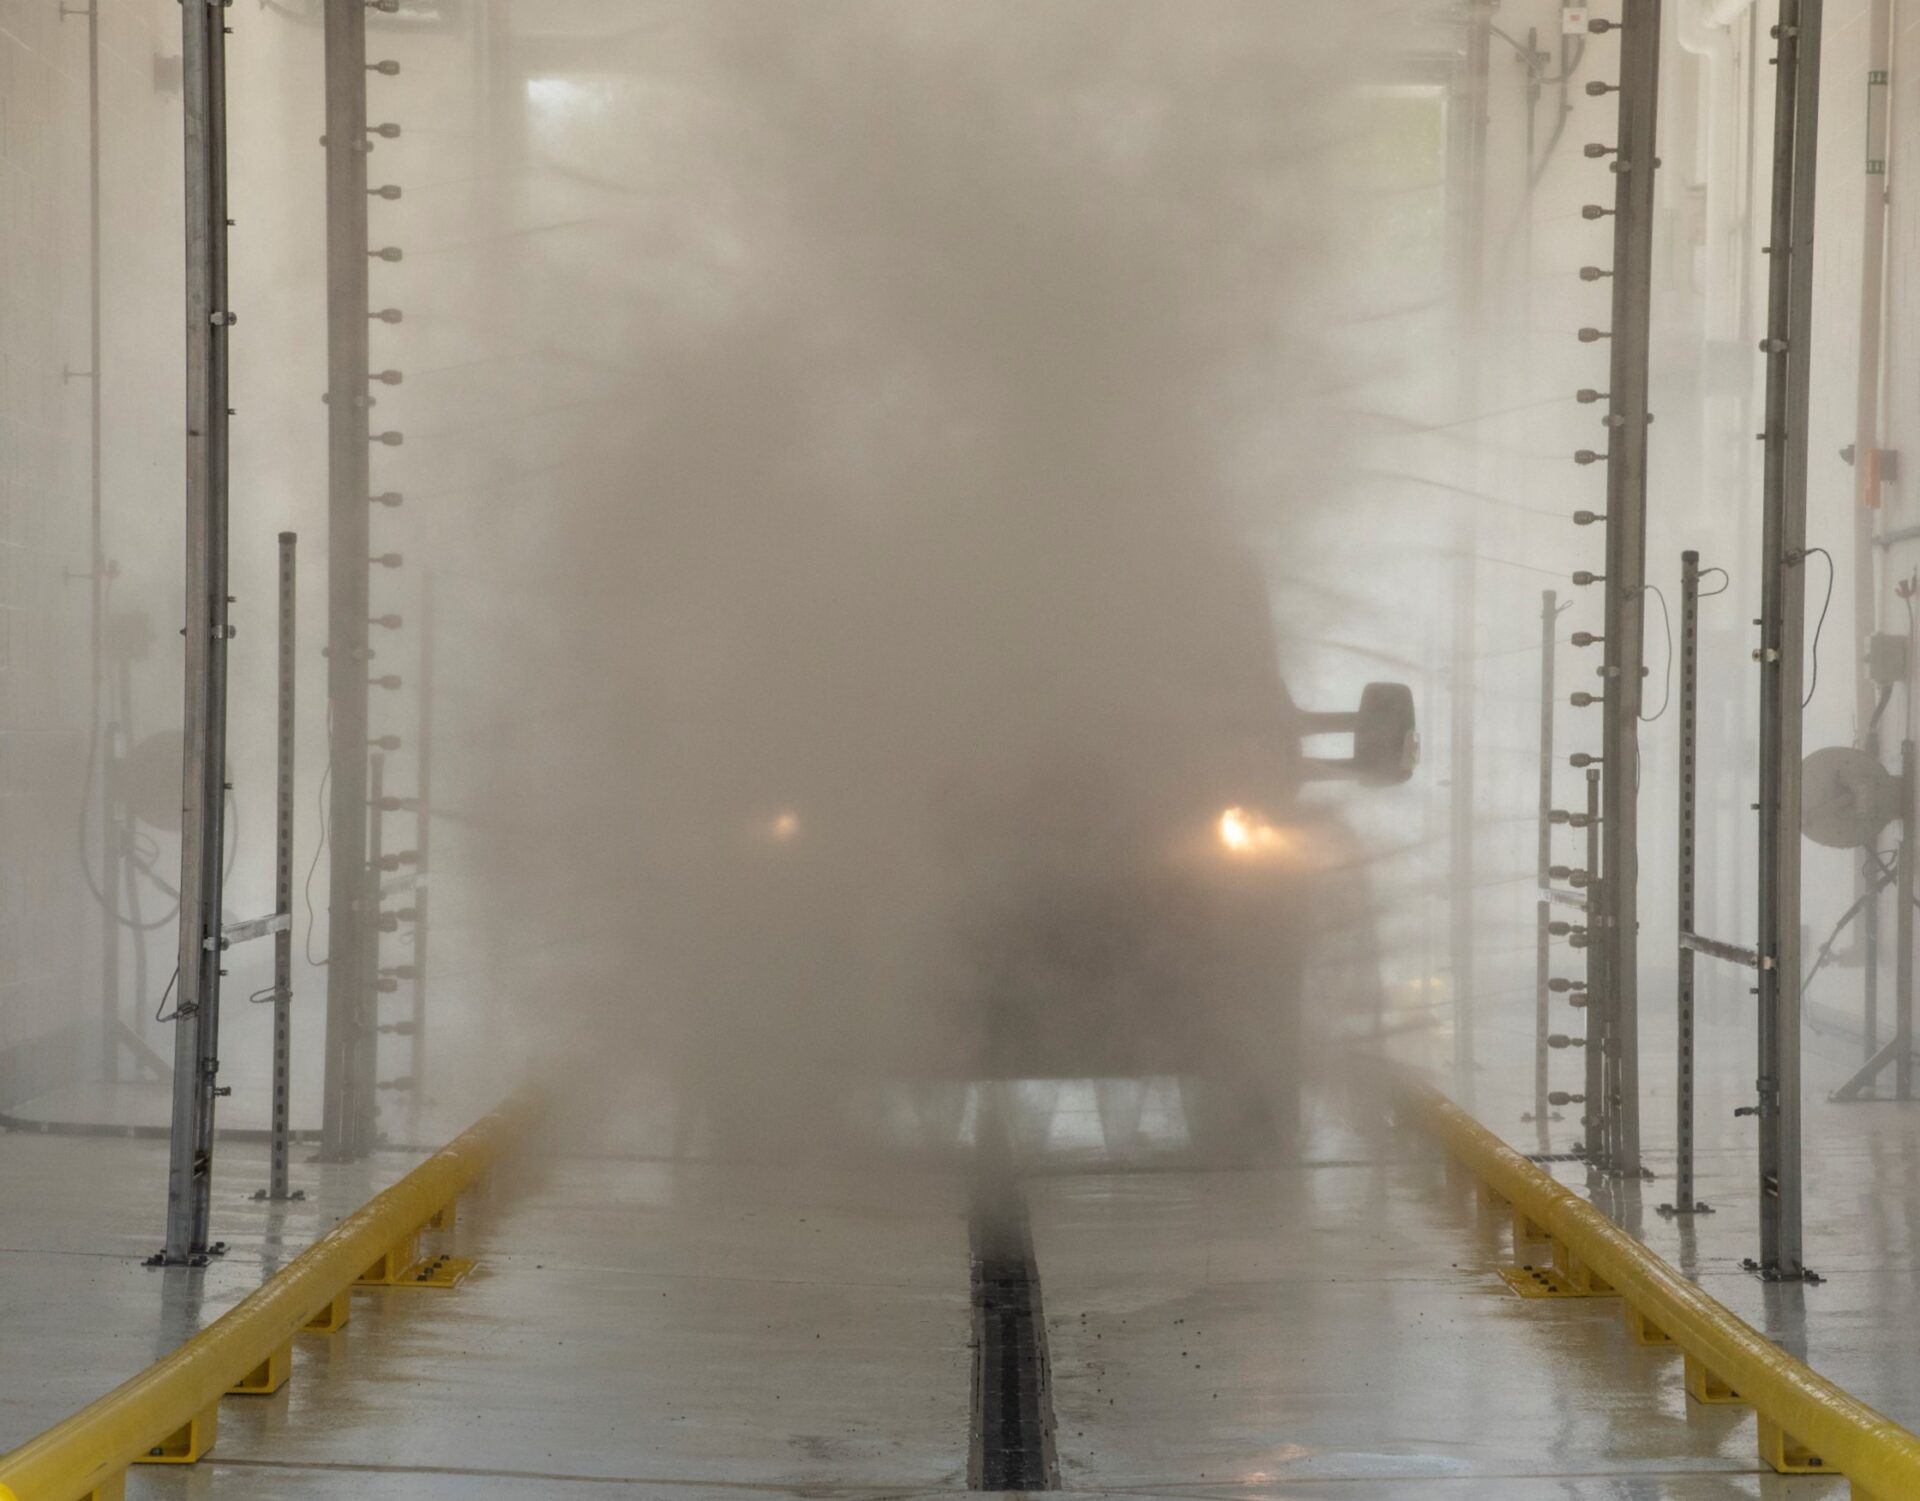 van in an automatic wash system